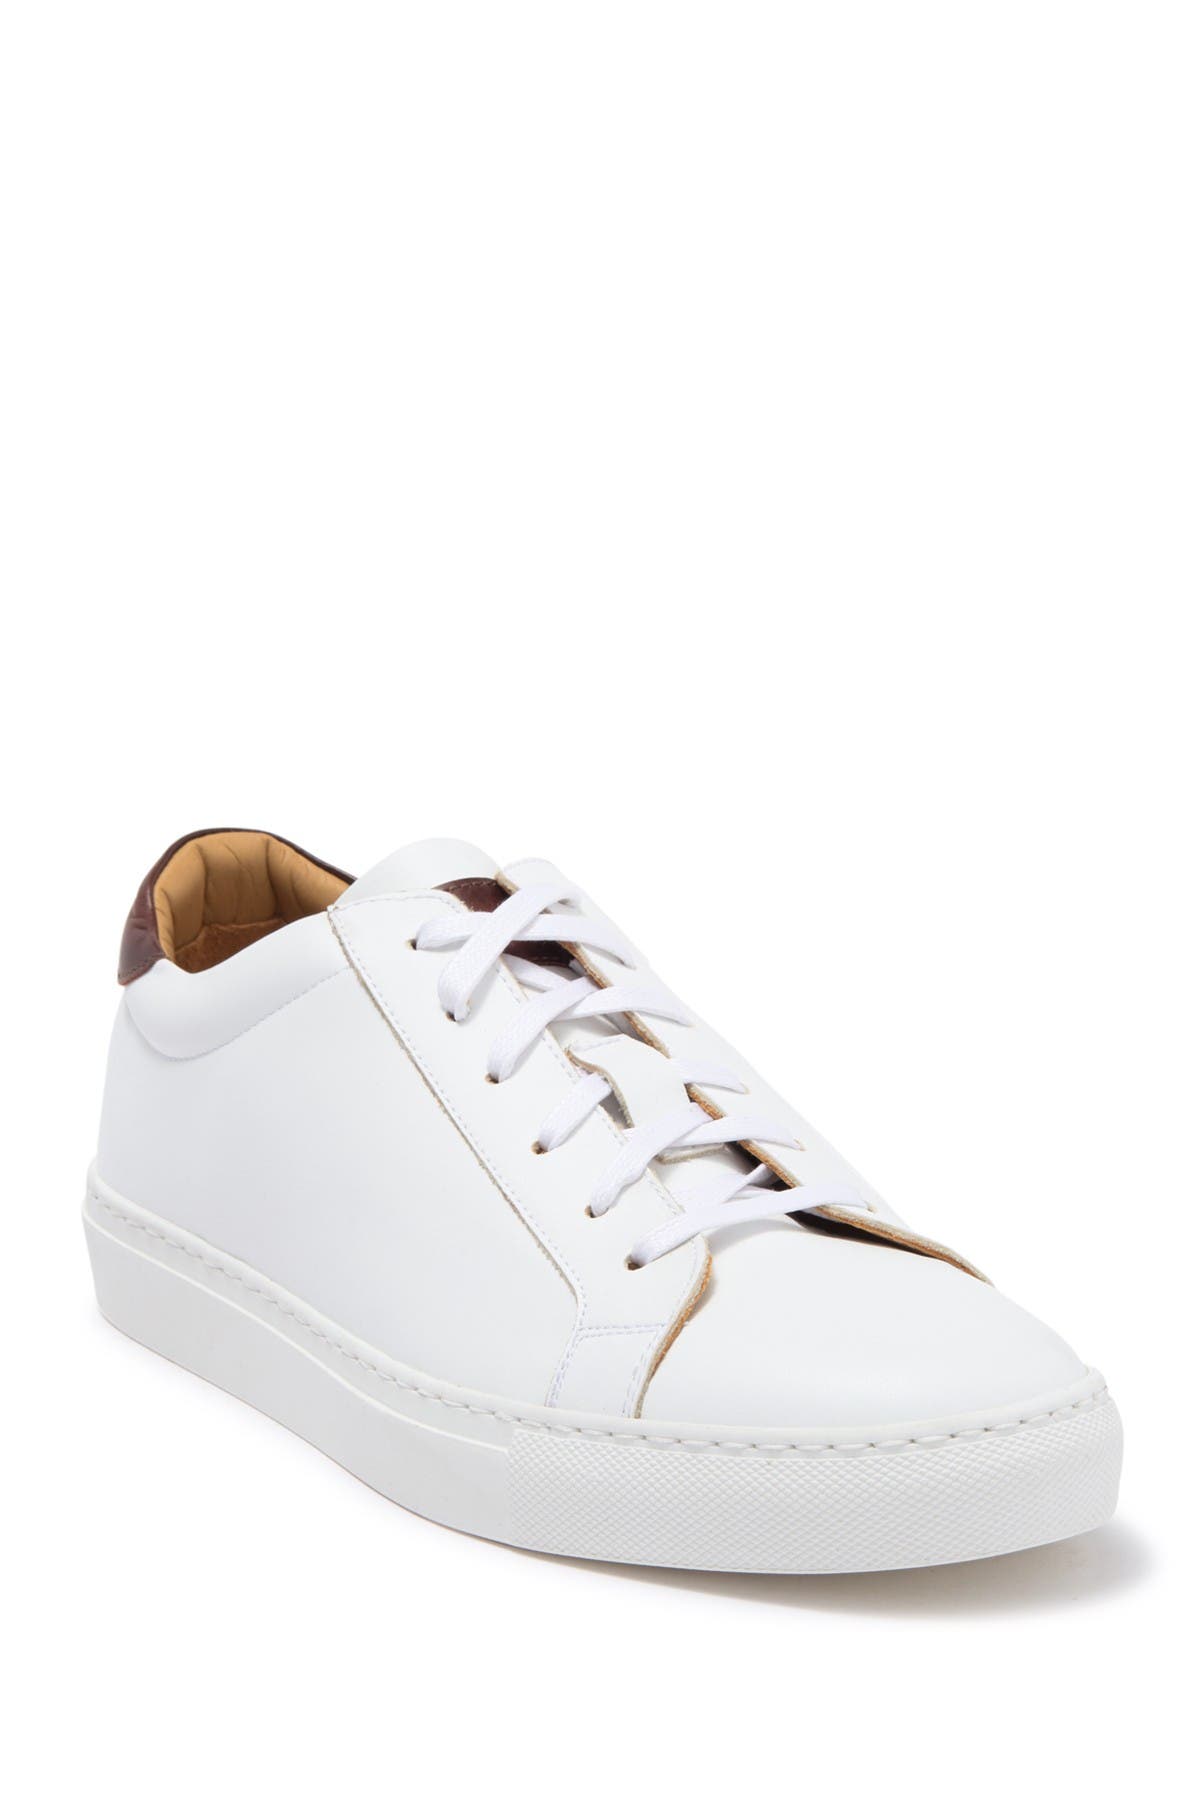 TO BOOT NEW YORK DEVIN LEATHER SNEAKER,195024060946